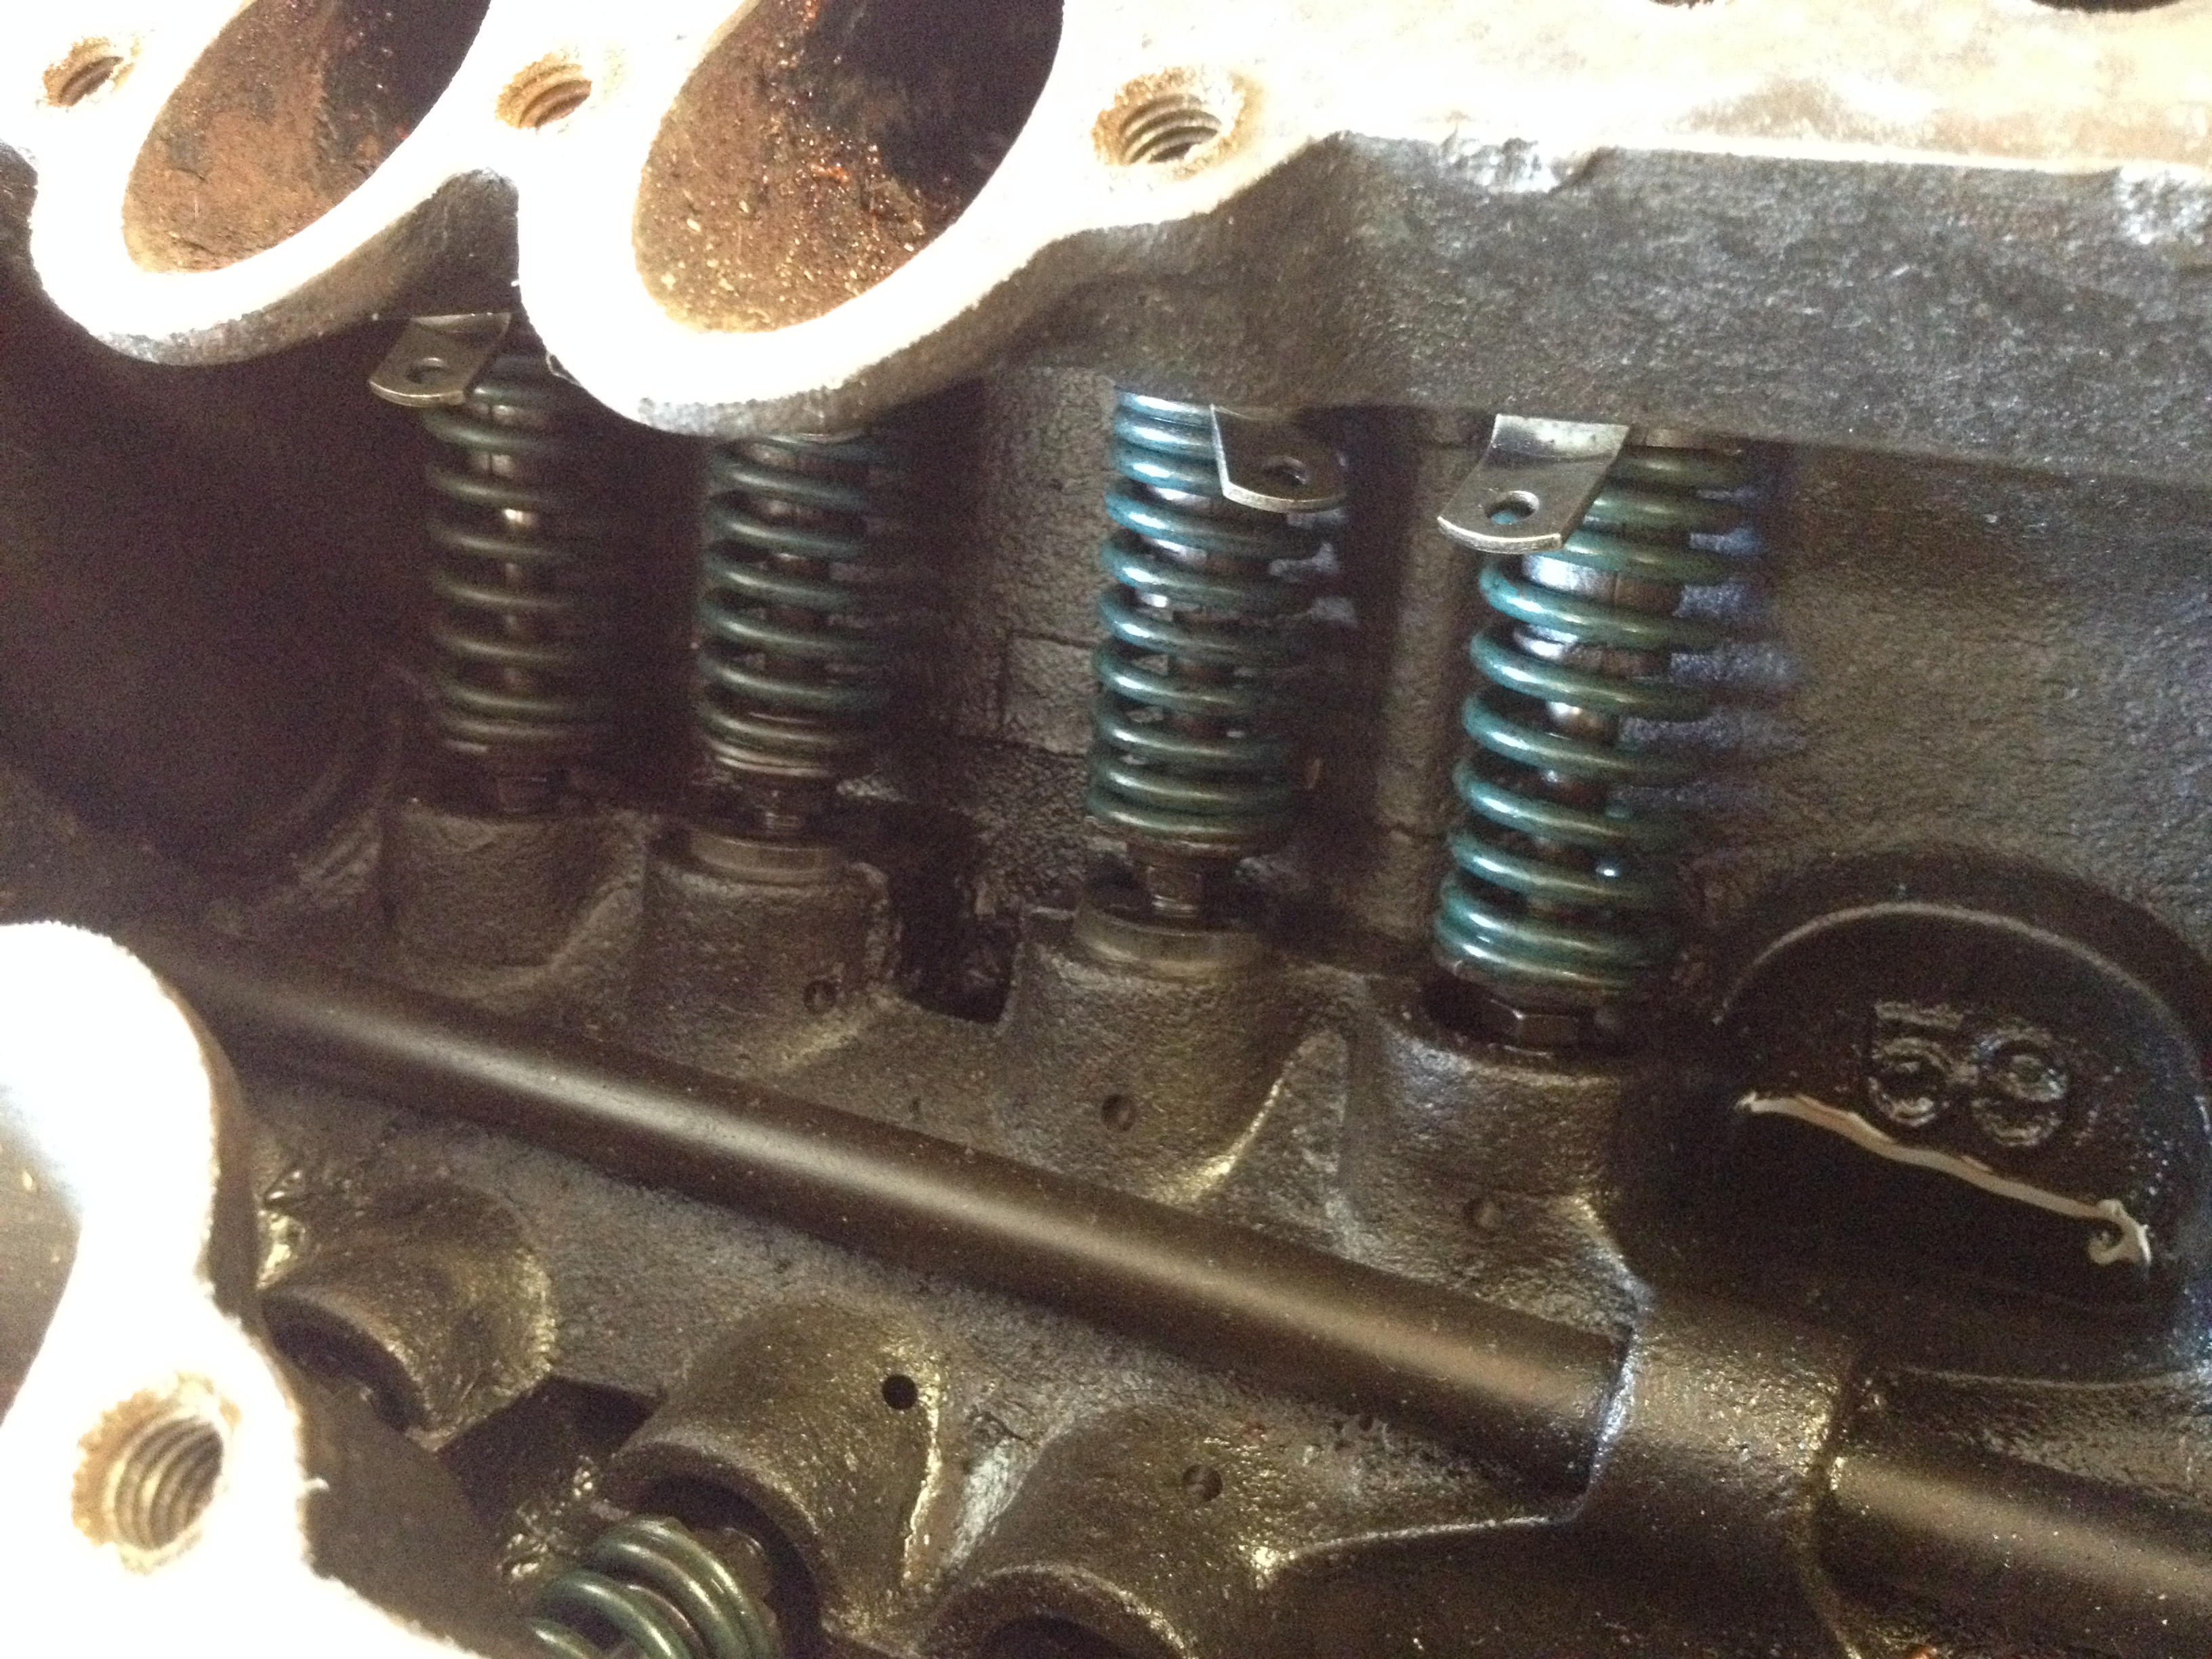 Looks pretty clean and fresh down under the intake manifold, although I did discover a stuck valve on the other side.  